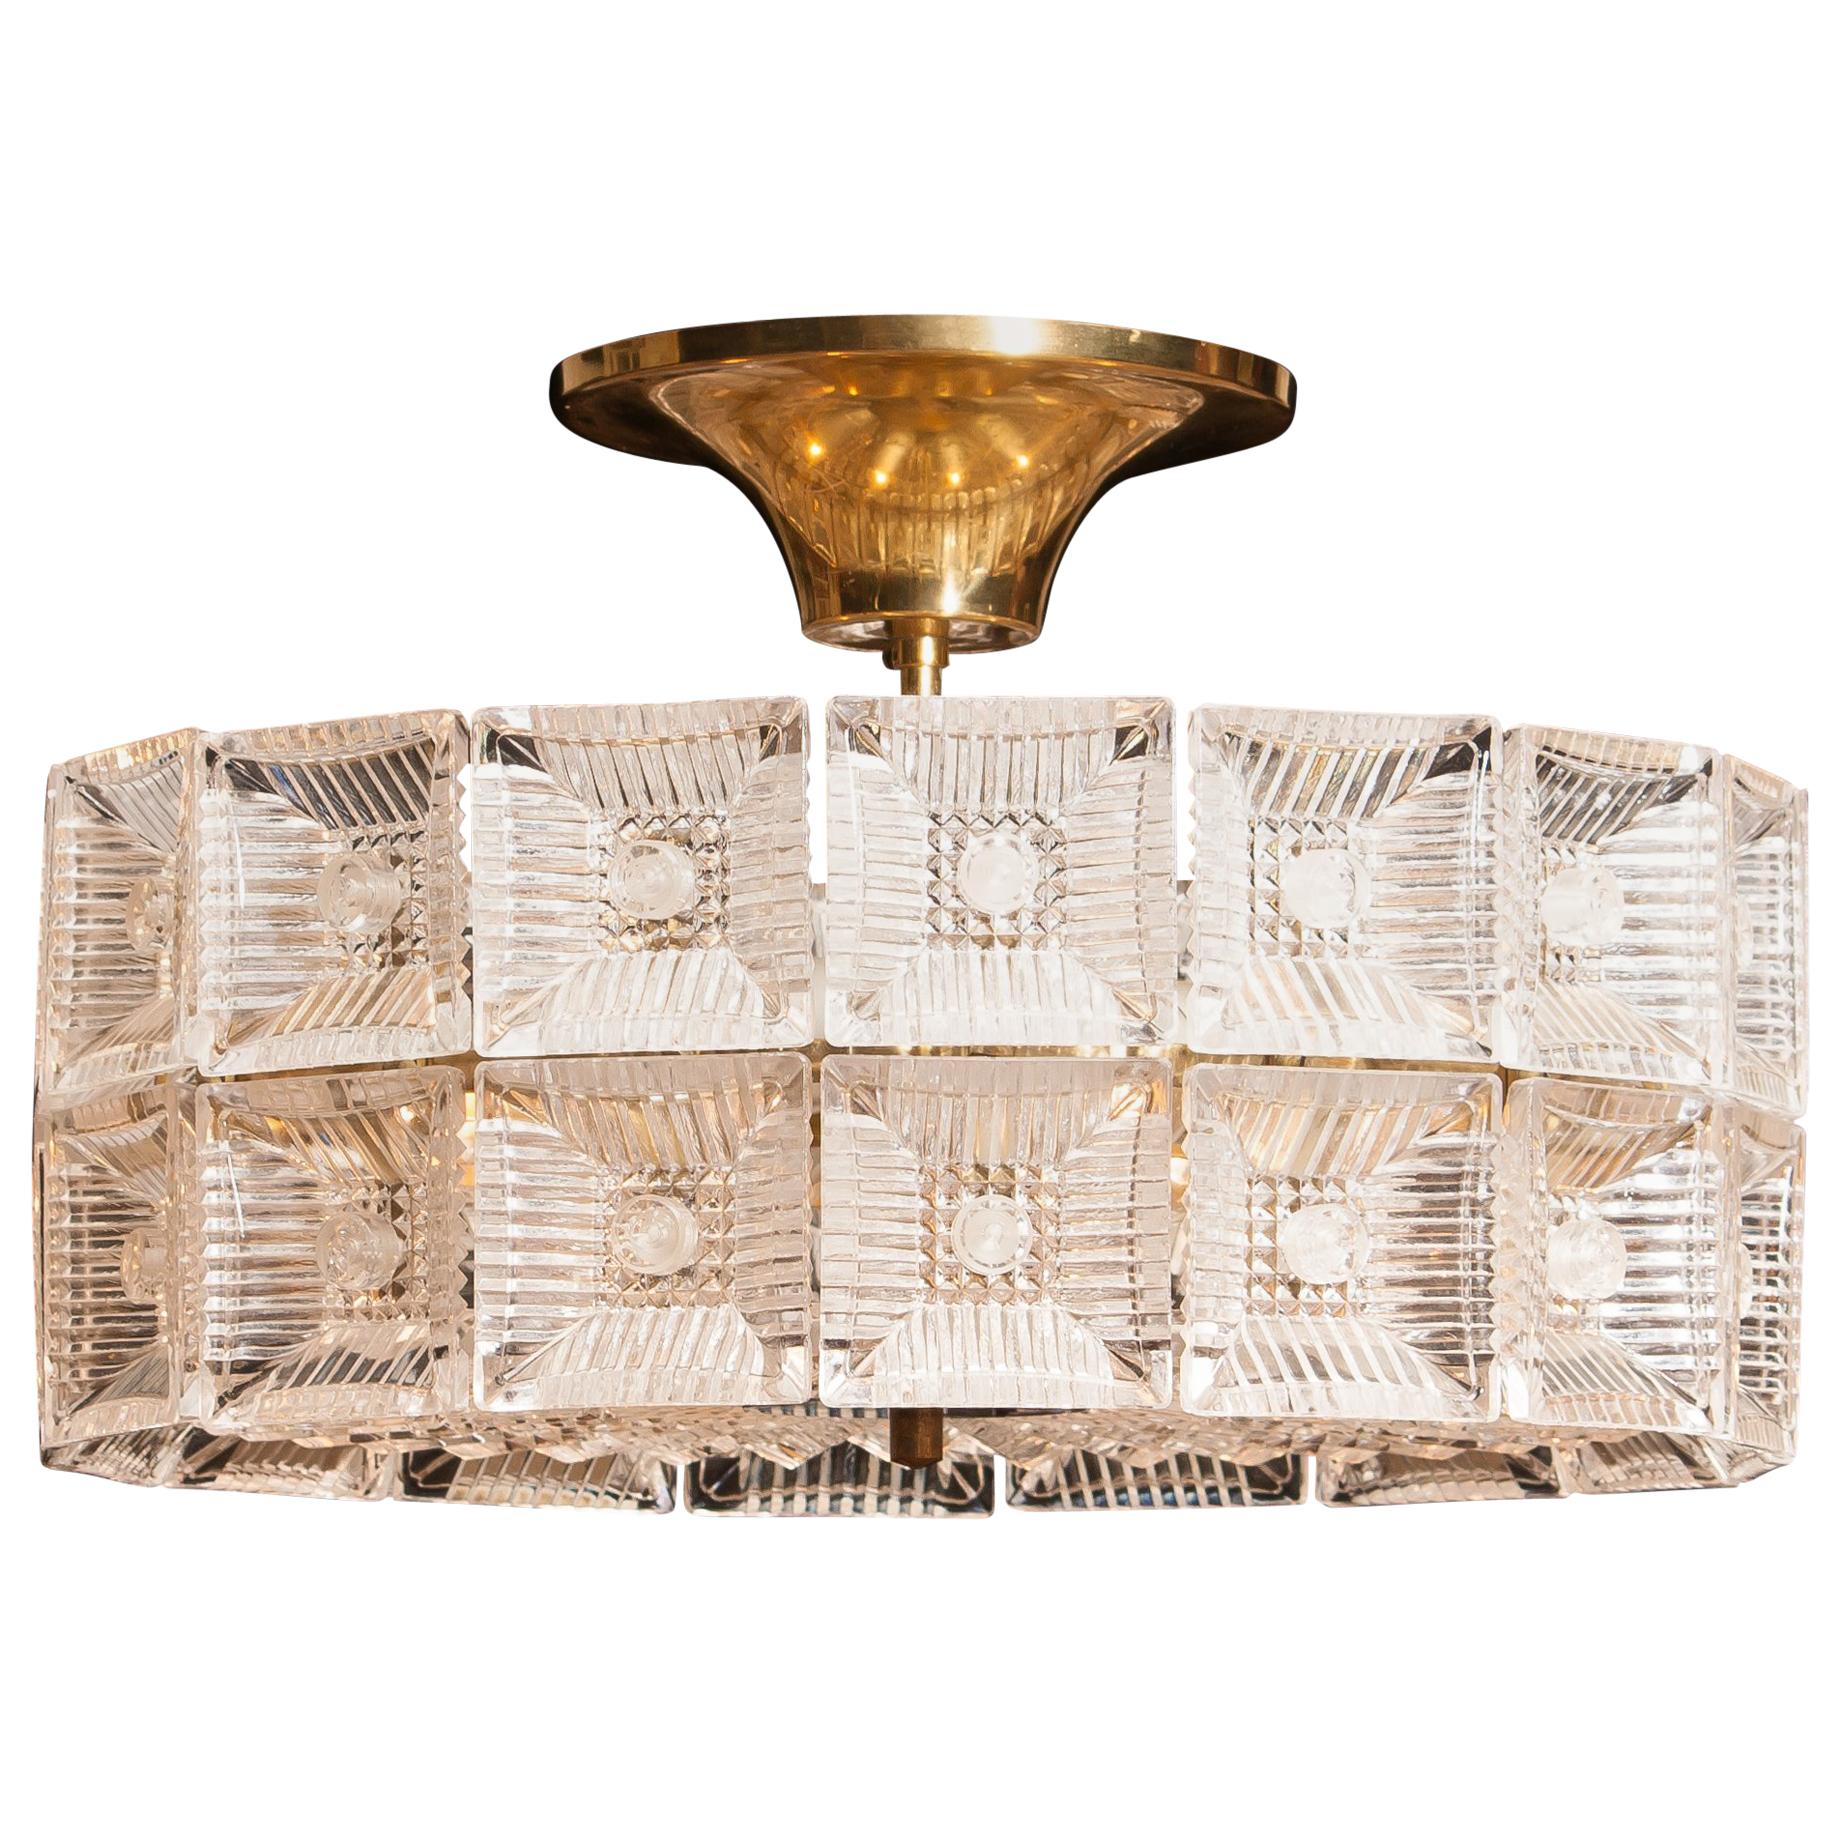 Magnificent ceiling light designed by Carl Fagerlund for Orrefors Sweden.
This lamp is made of beautiful brass and glass elements.
It is in wonderful condition.
Period 1960s.
Dimensions: H 25 cm, ø 42 cm.